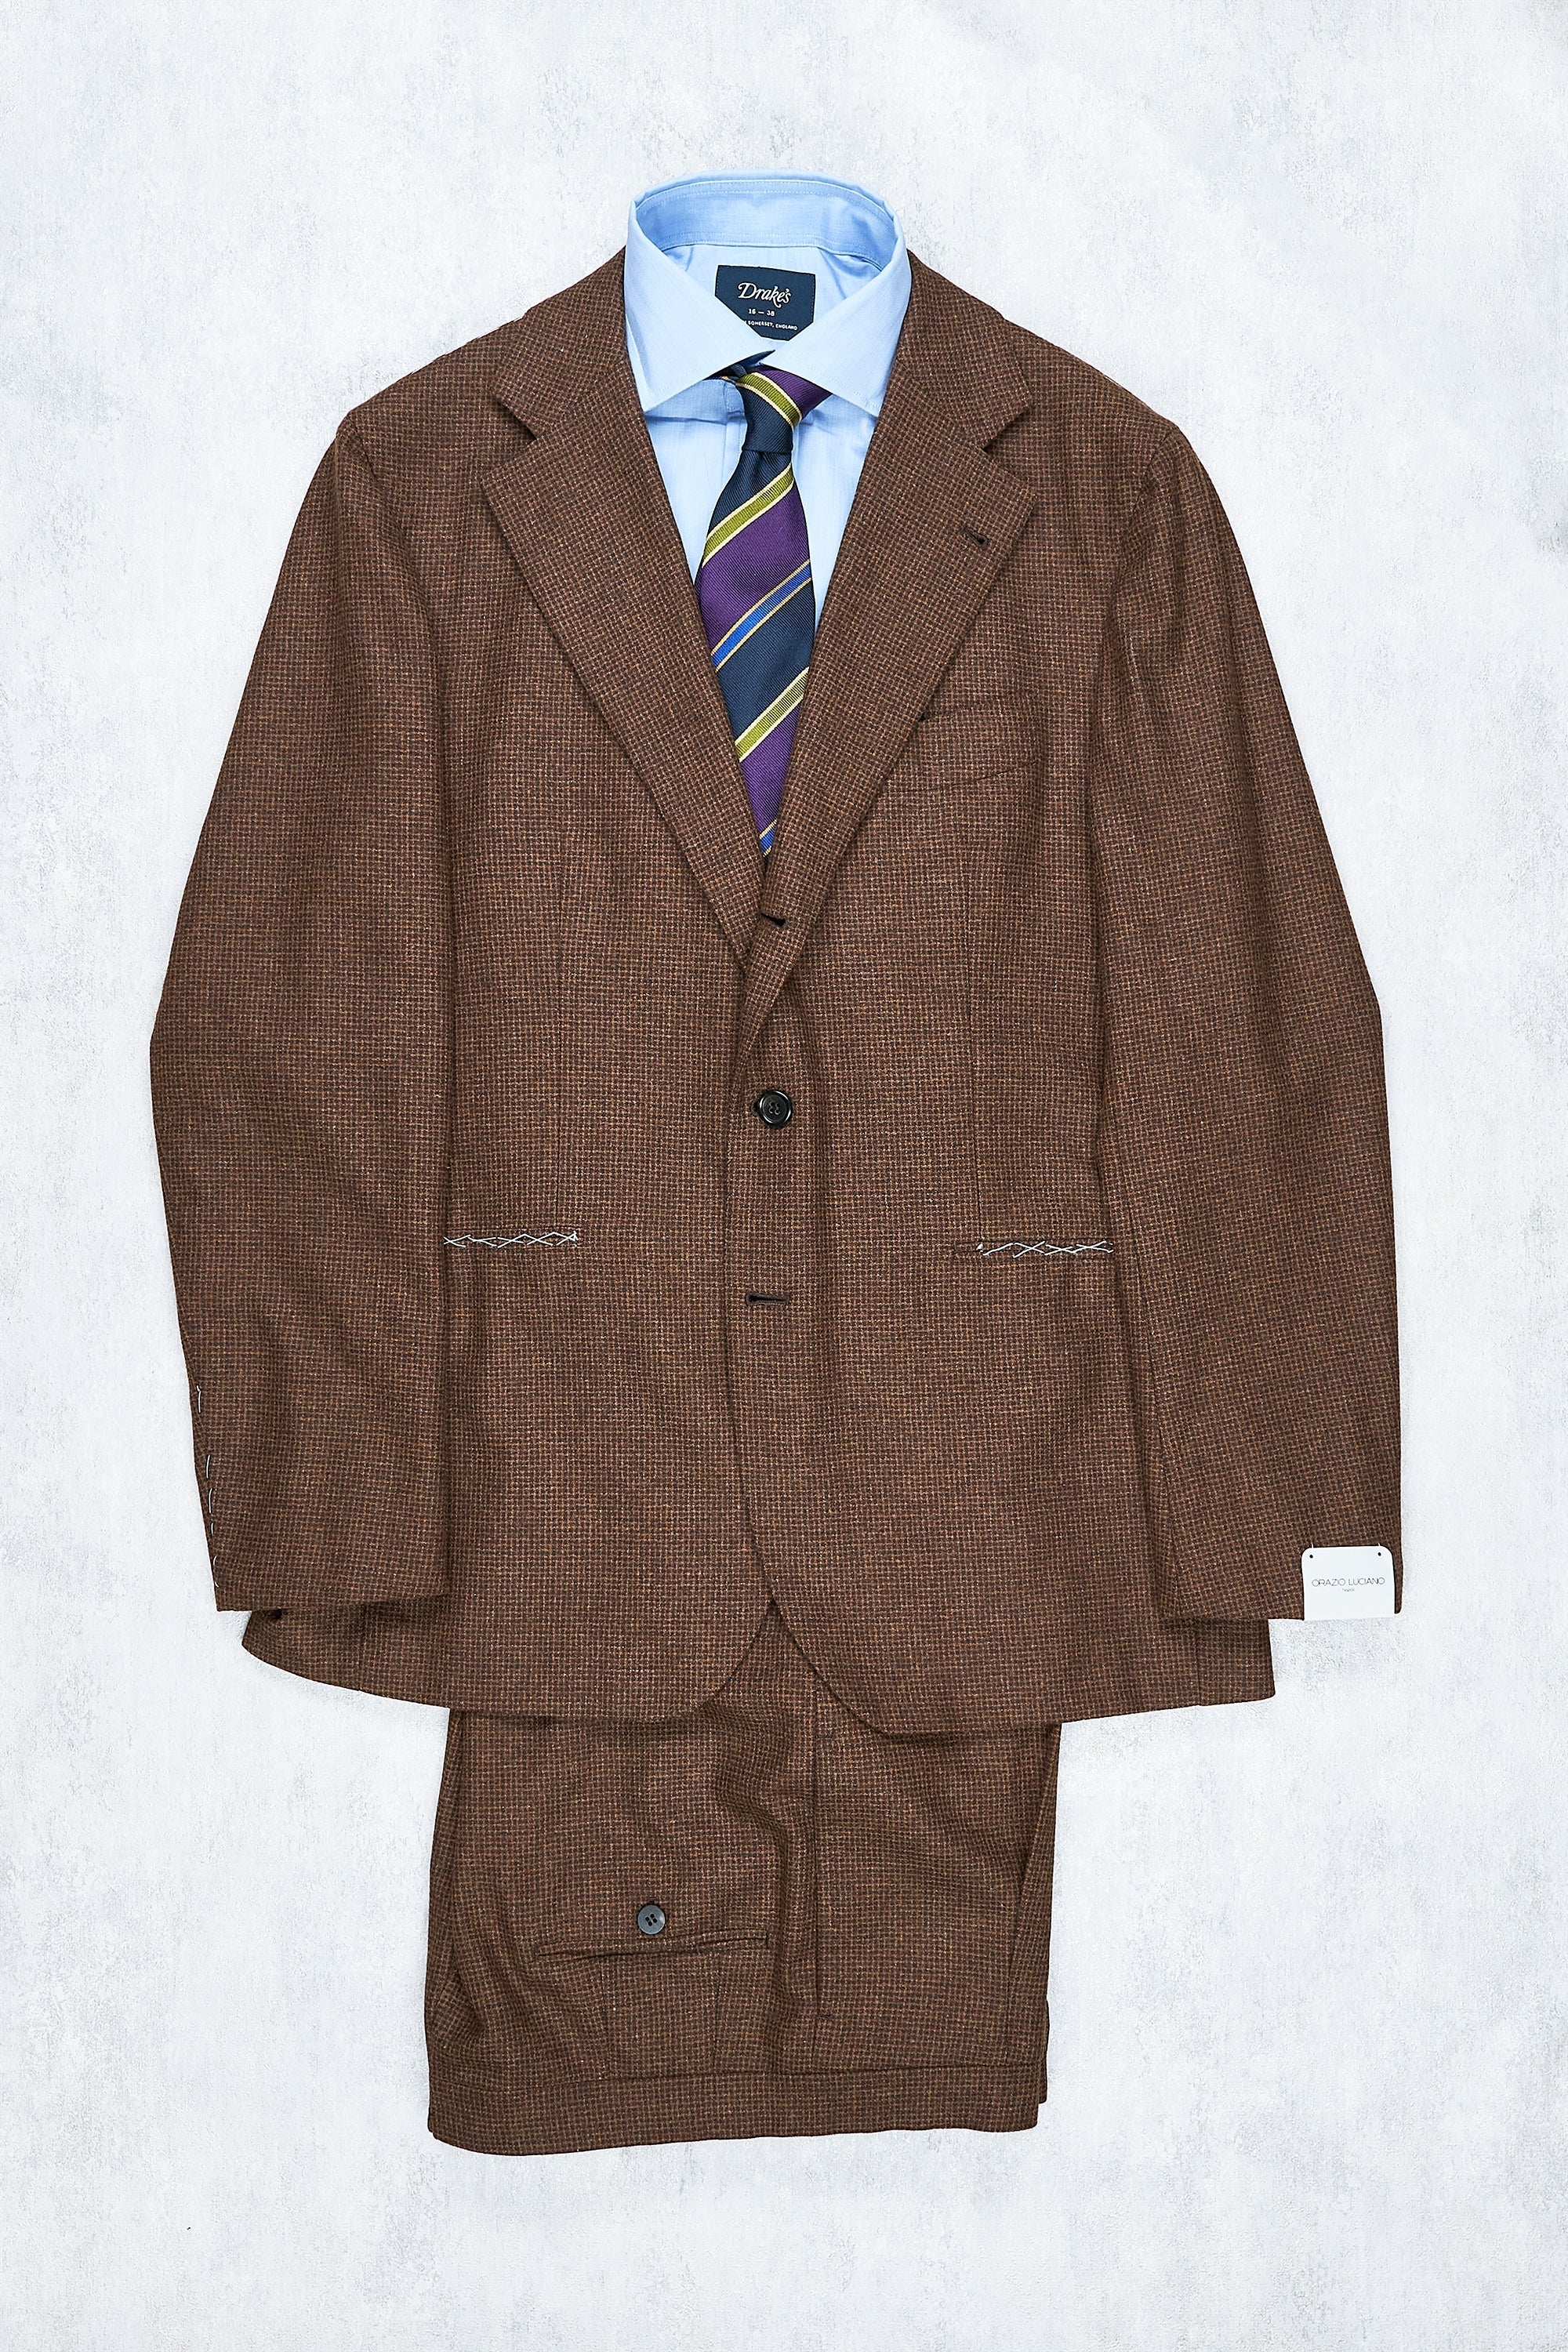 Orazio Luciano Rustic Brown Vintage Wool/Cashmere Check Suit